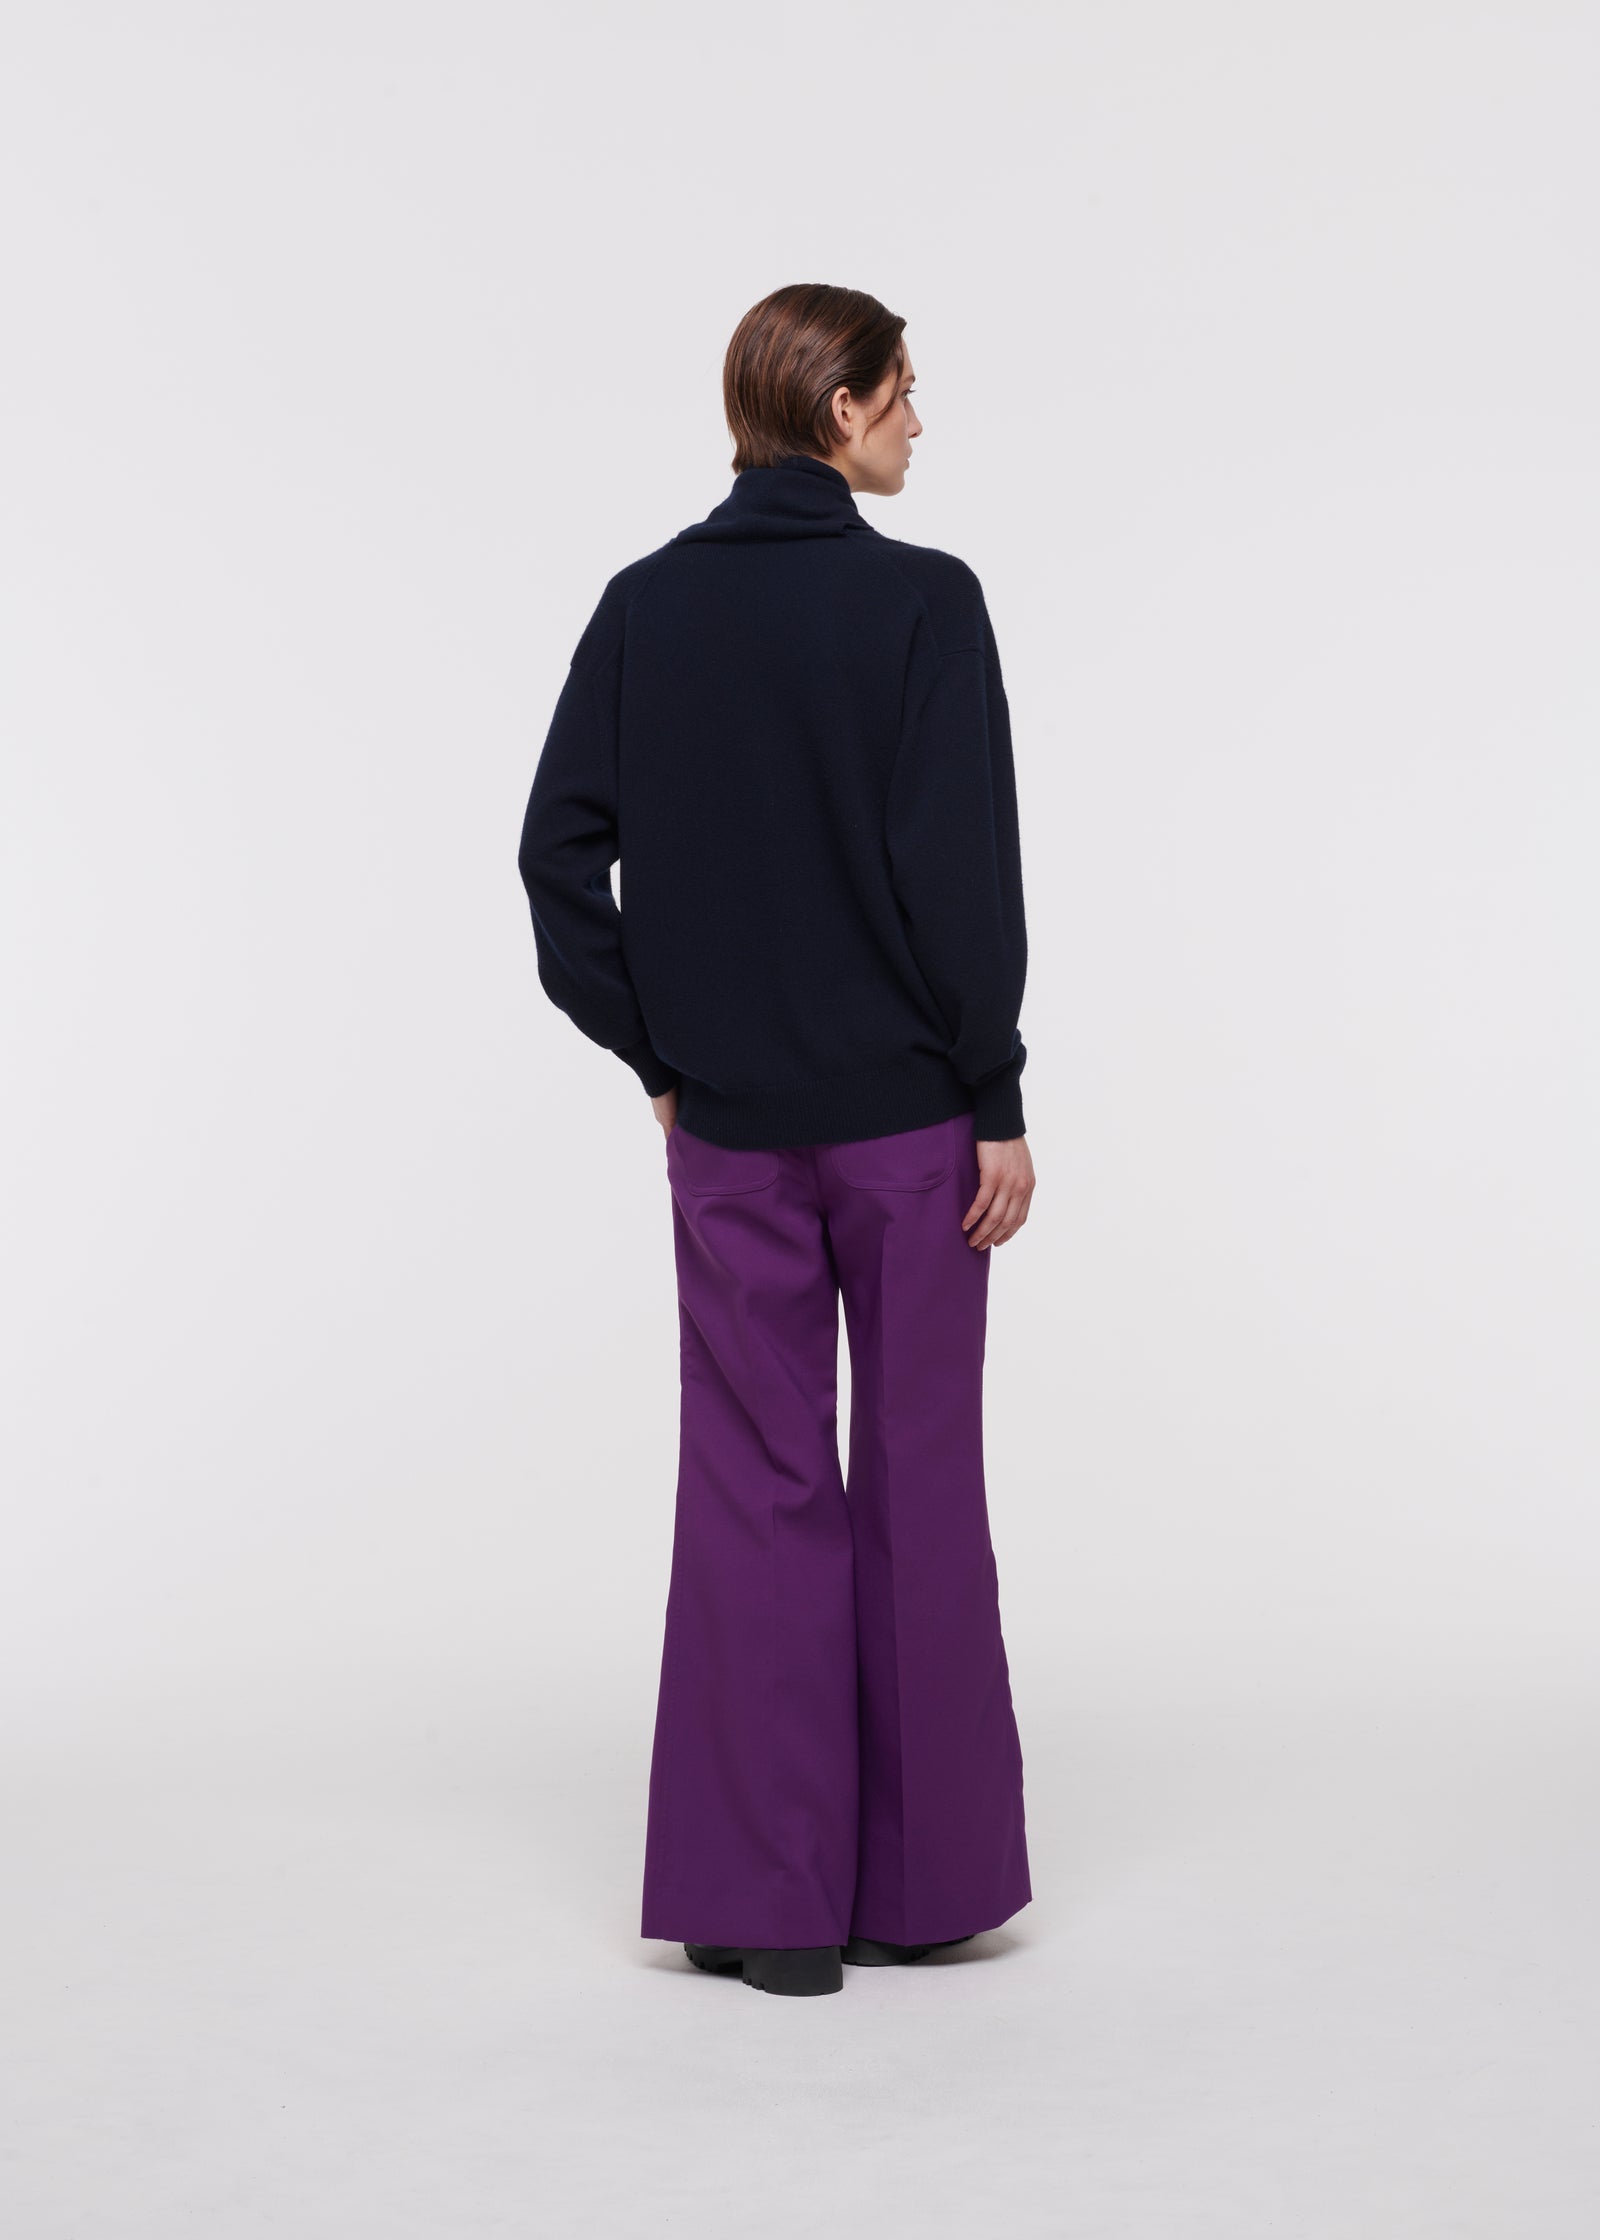 FLARE LEG PANTS IN DOUBLE ACTIVE